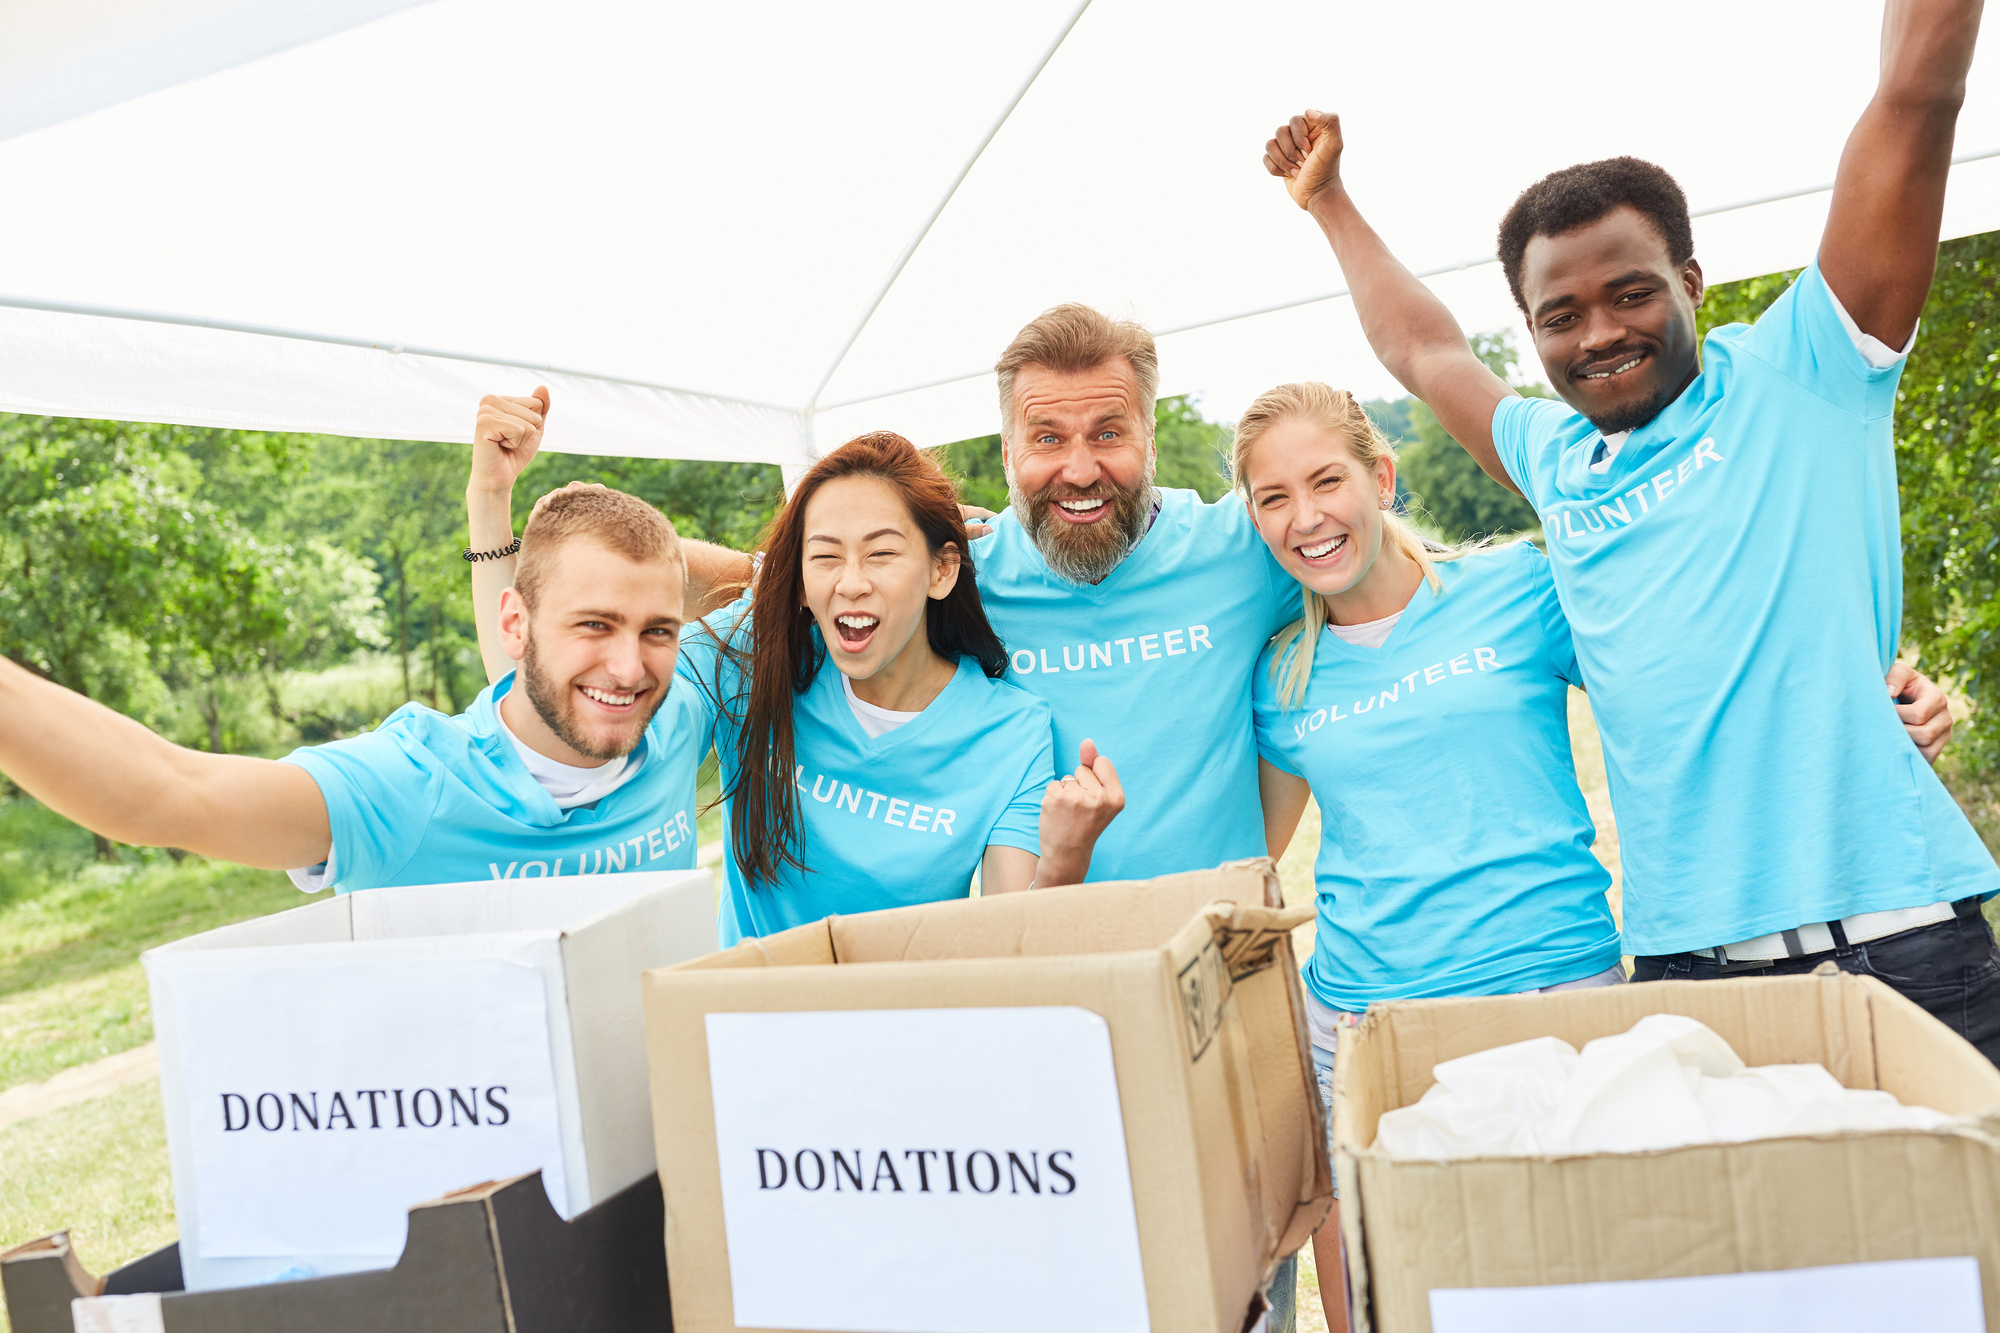 11 Steps For A Successful Fundraising Campaign - CareerGuide